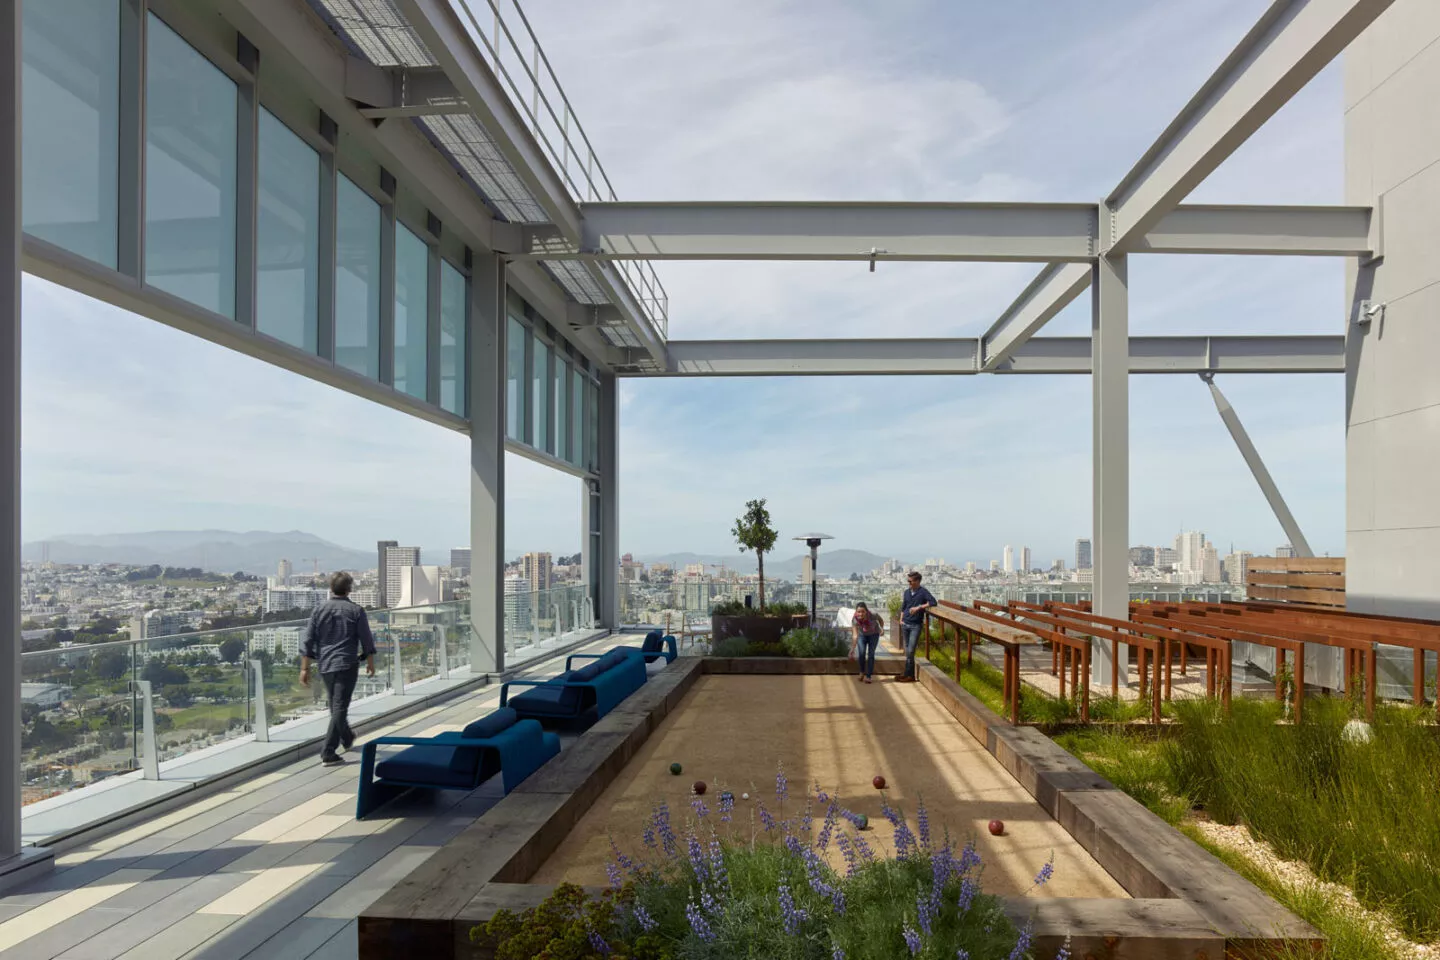 Rooftop amenity floor of SCB's 100 Van Ness. Architecture. Adaptive reuse. Renovation. Residential.